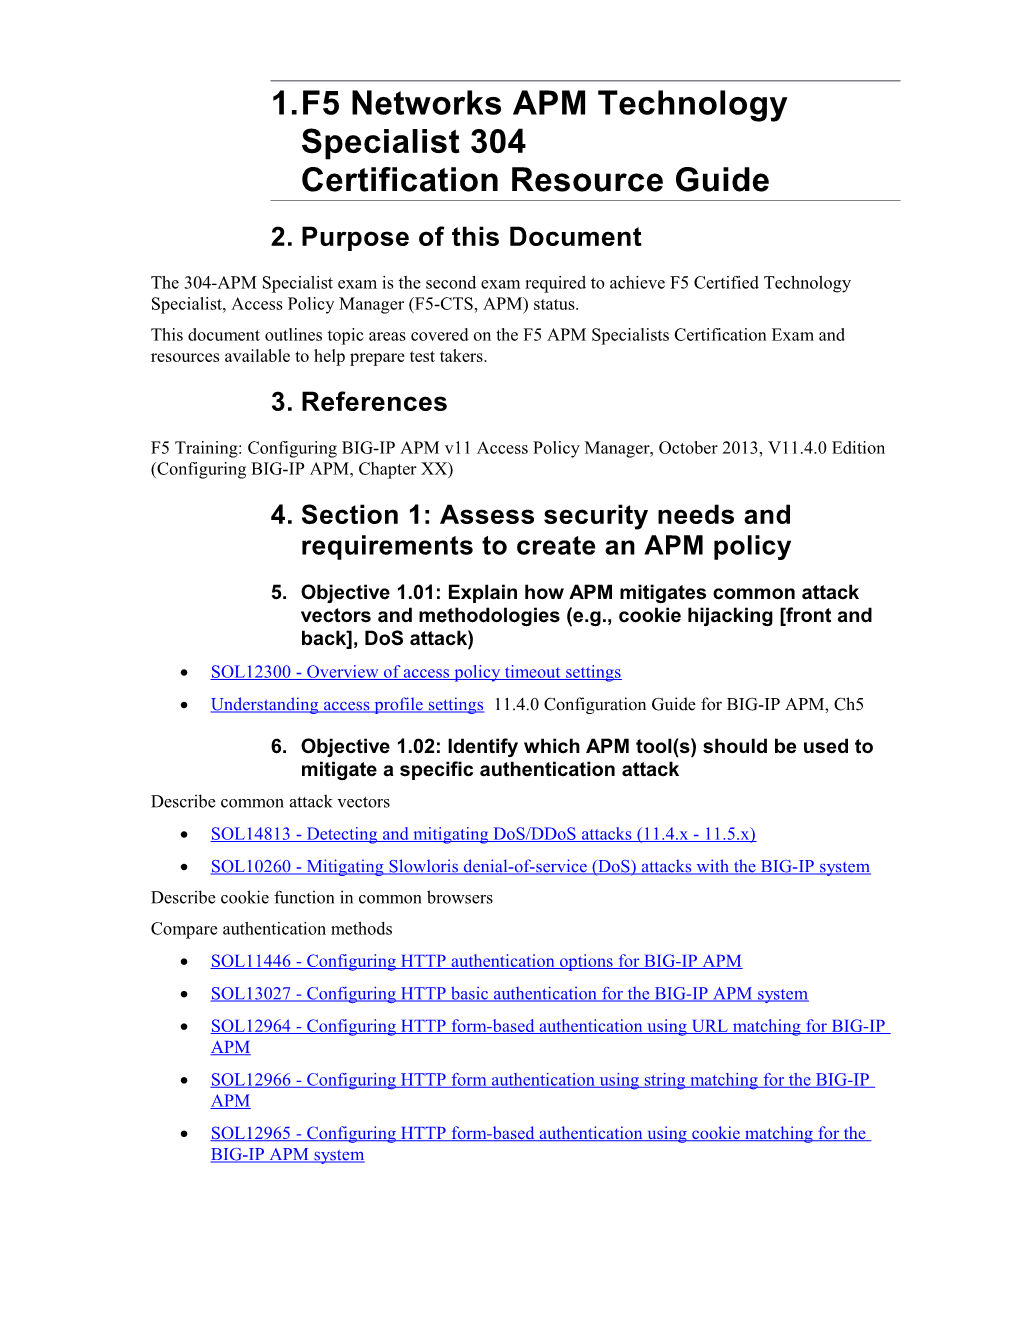 Section 1: Assess Security Needs and Requirements to Create an APM Policy